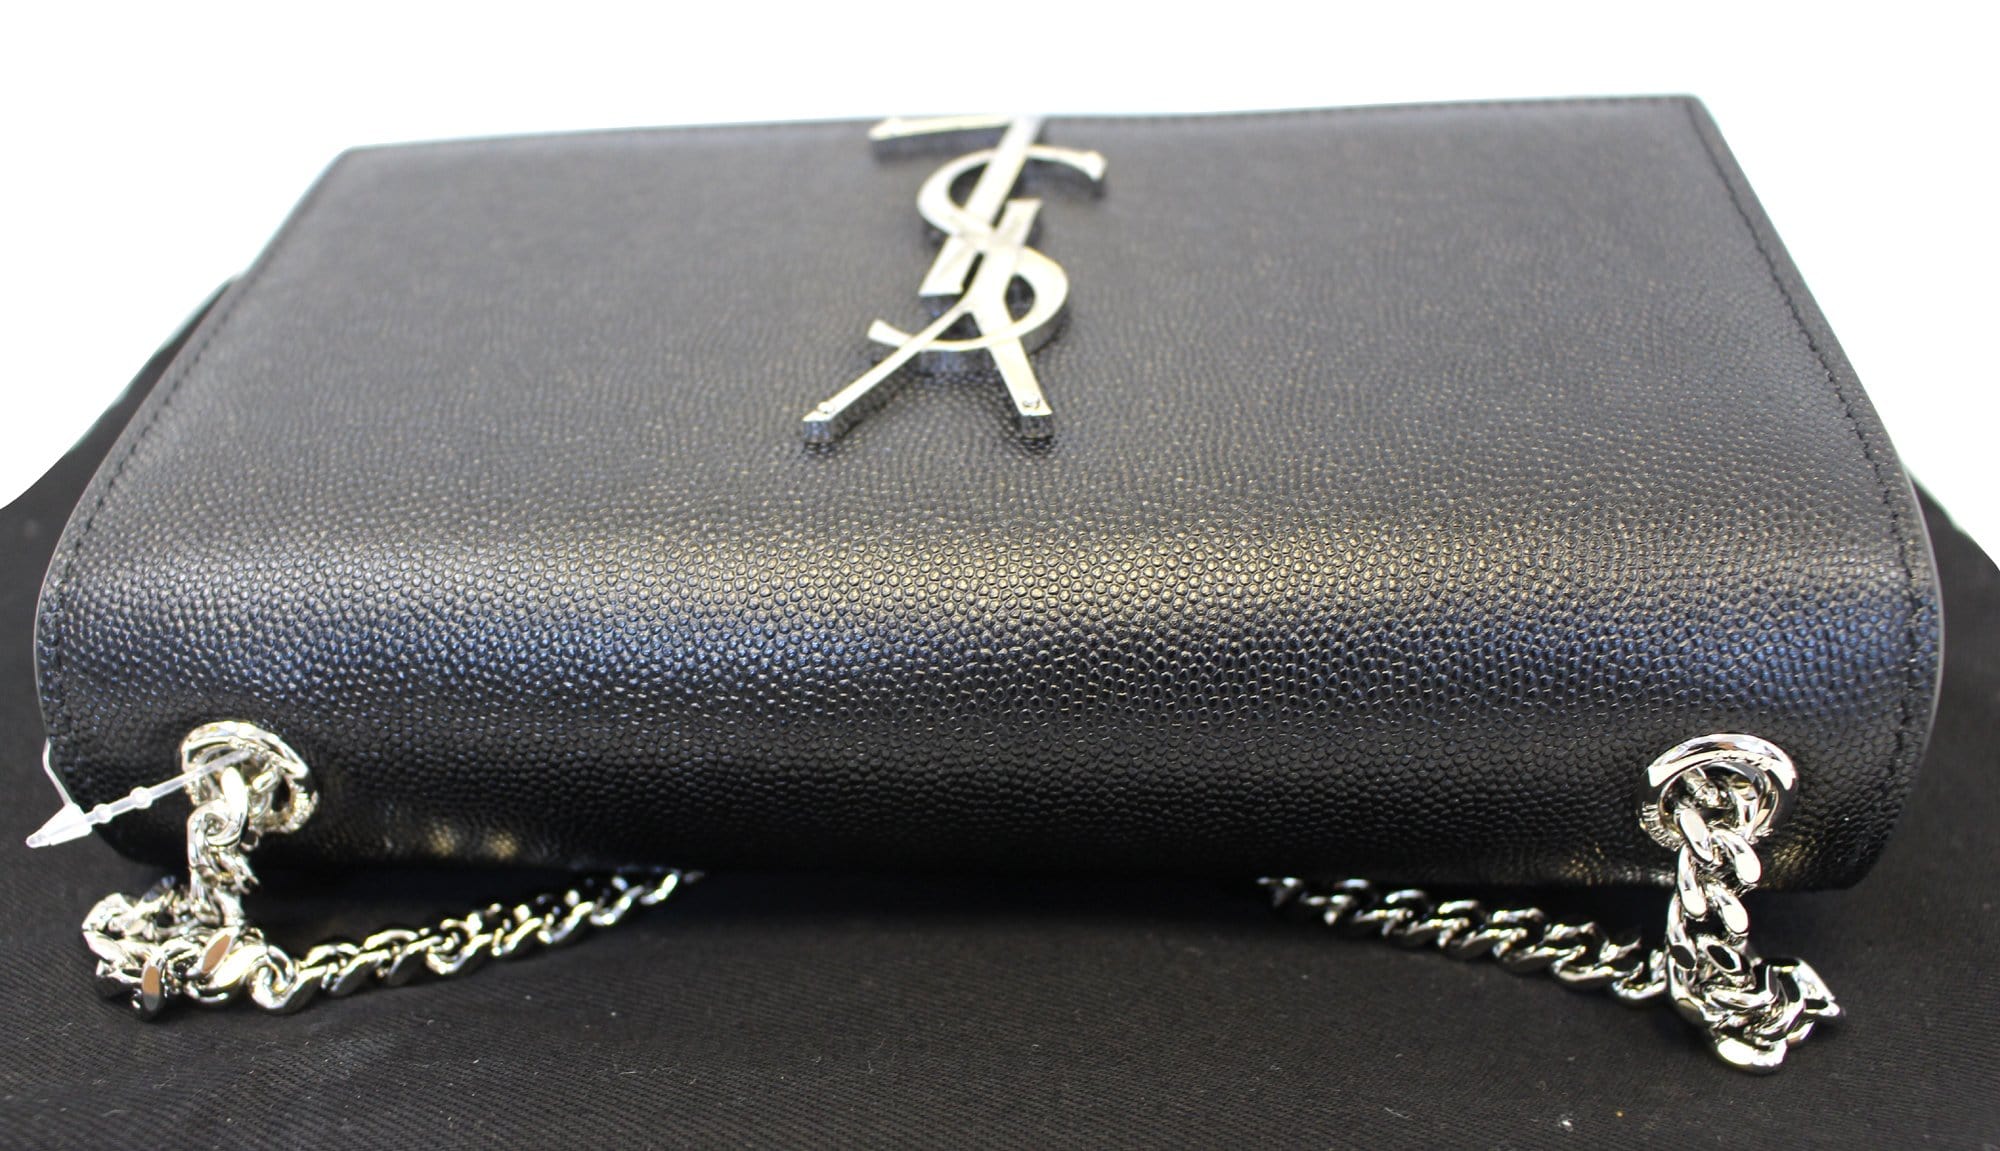 SAINT LAURENT Kate Small bag in black leather with silver logo